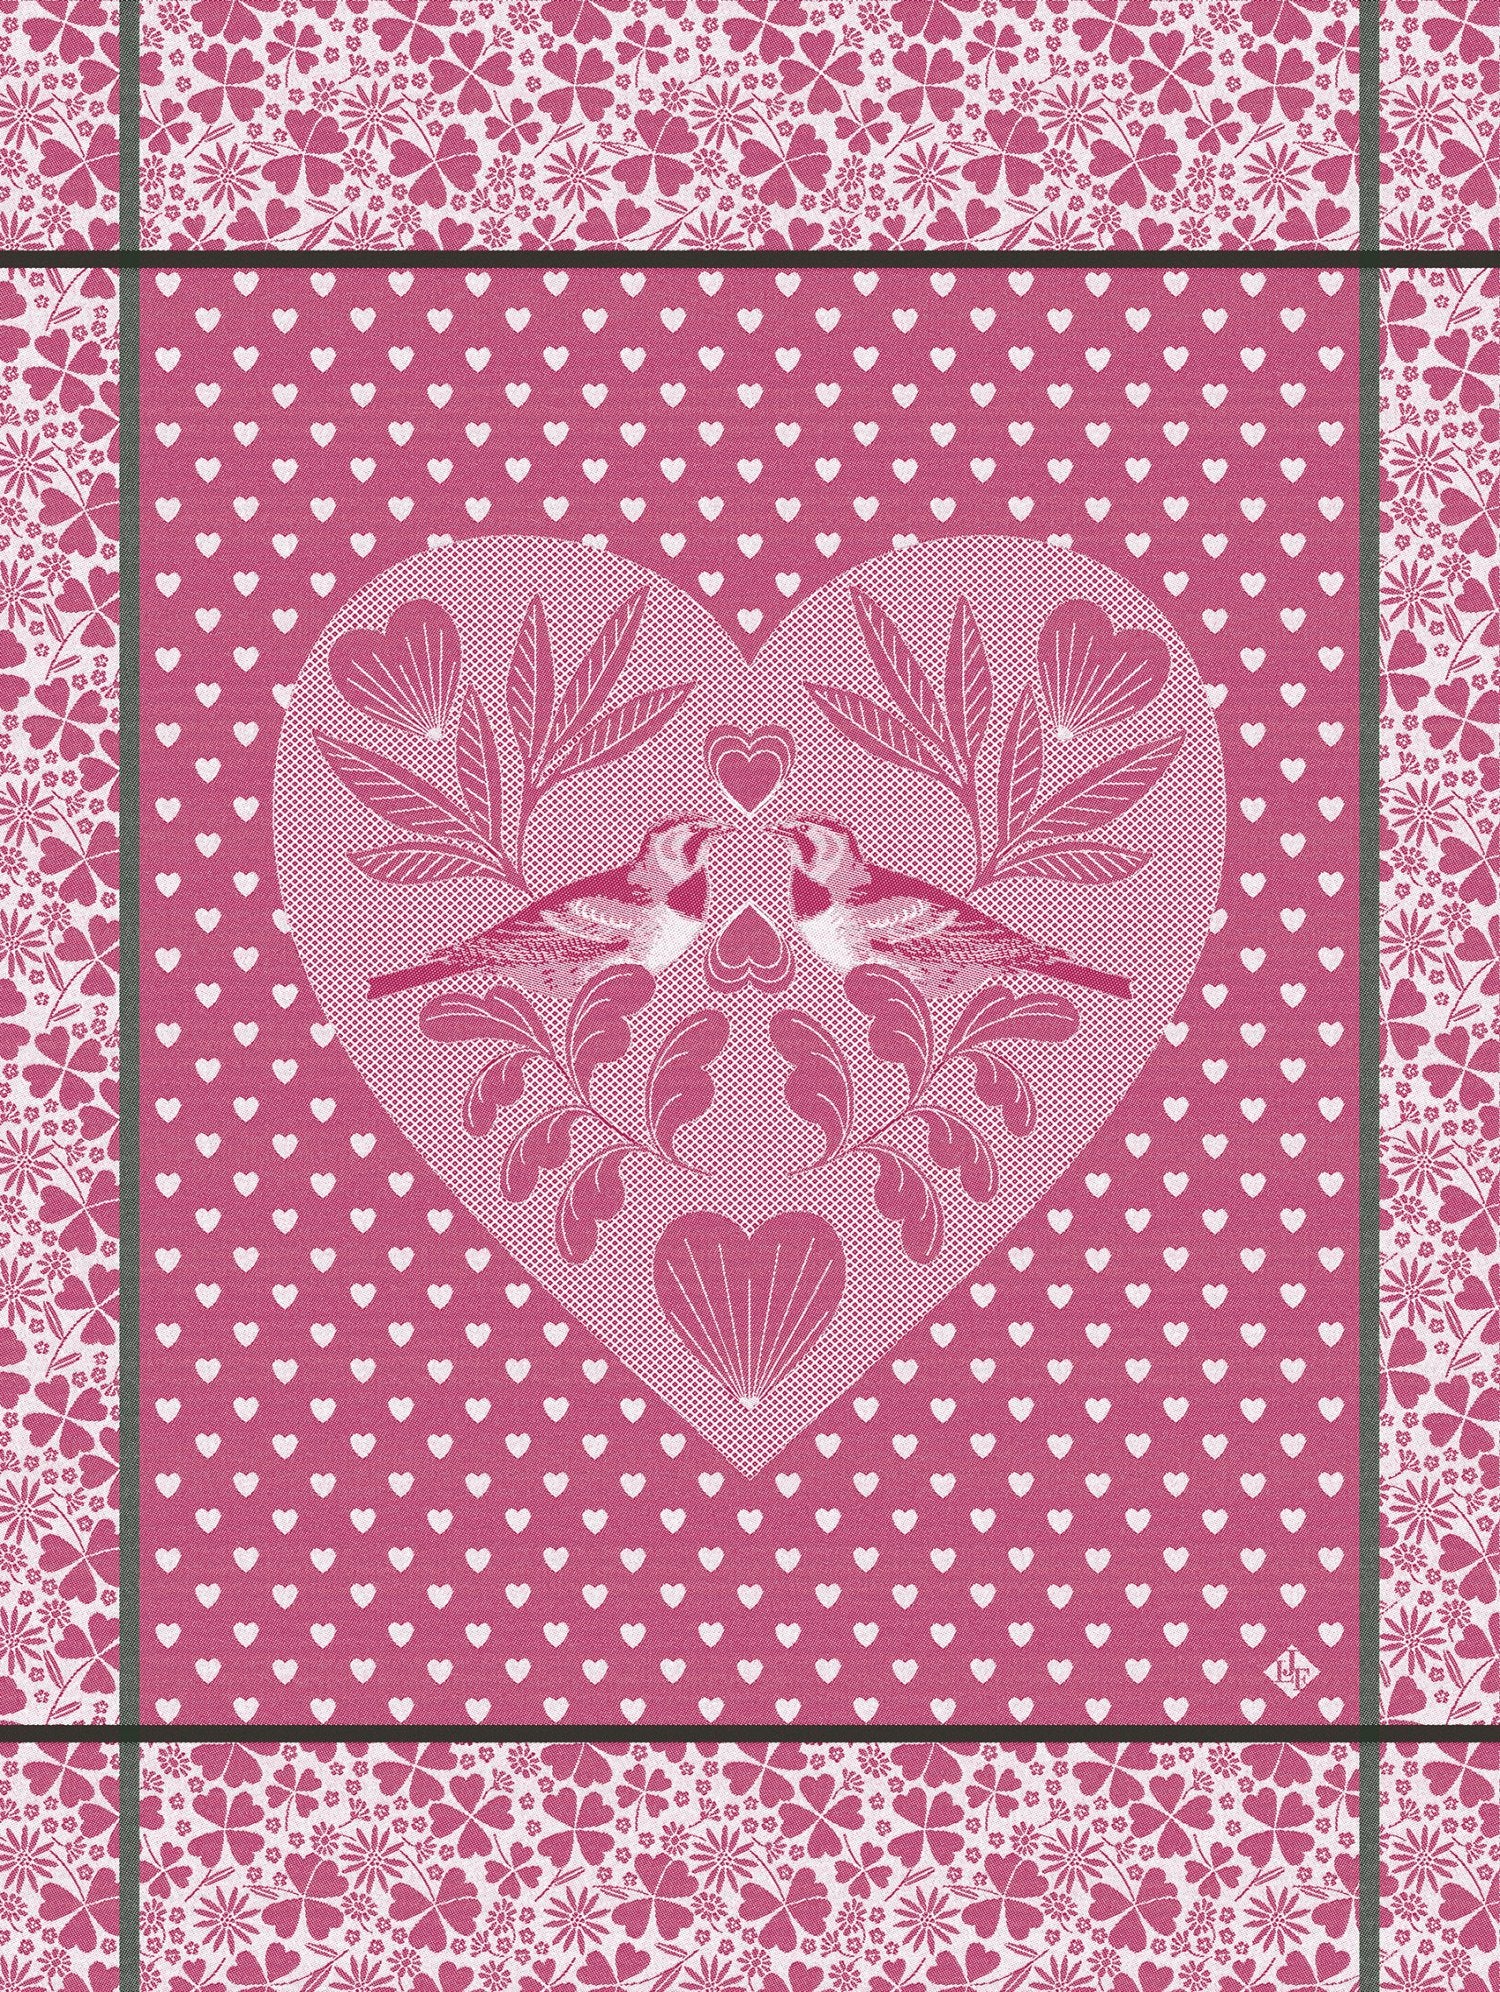 Jacquard Francais "Amour" (Pink), Woven cotton tea towel. Made in France.